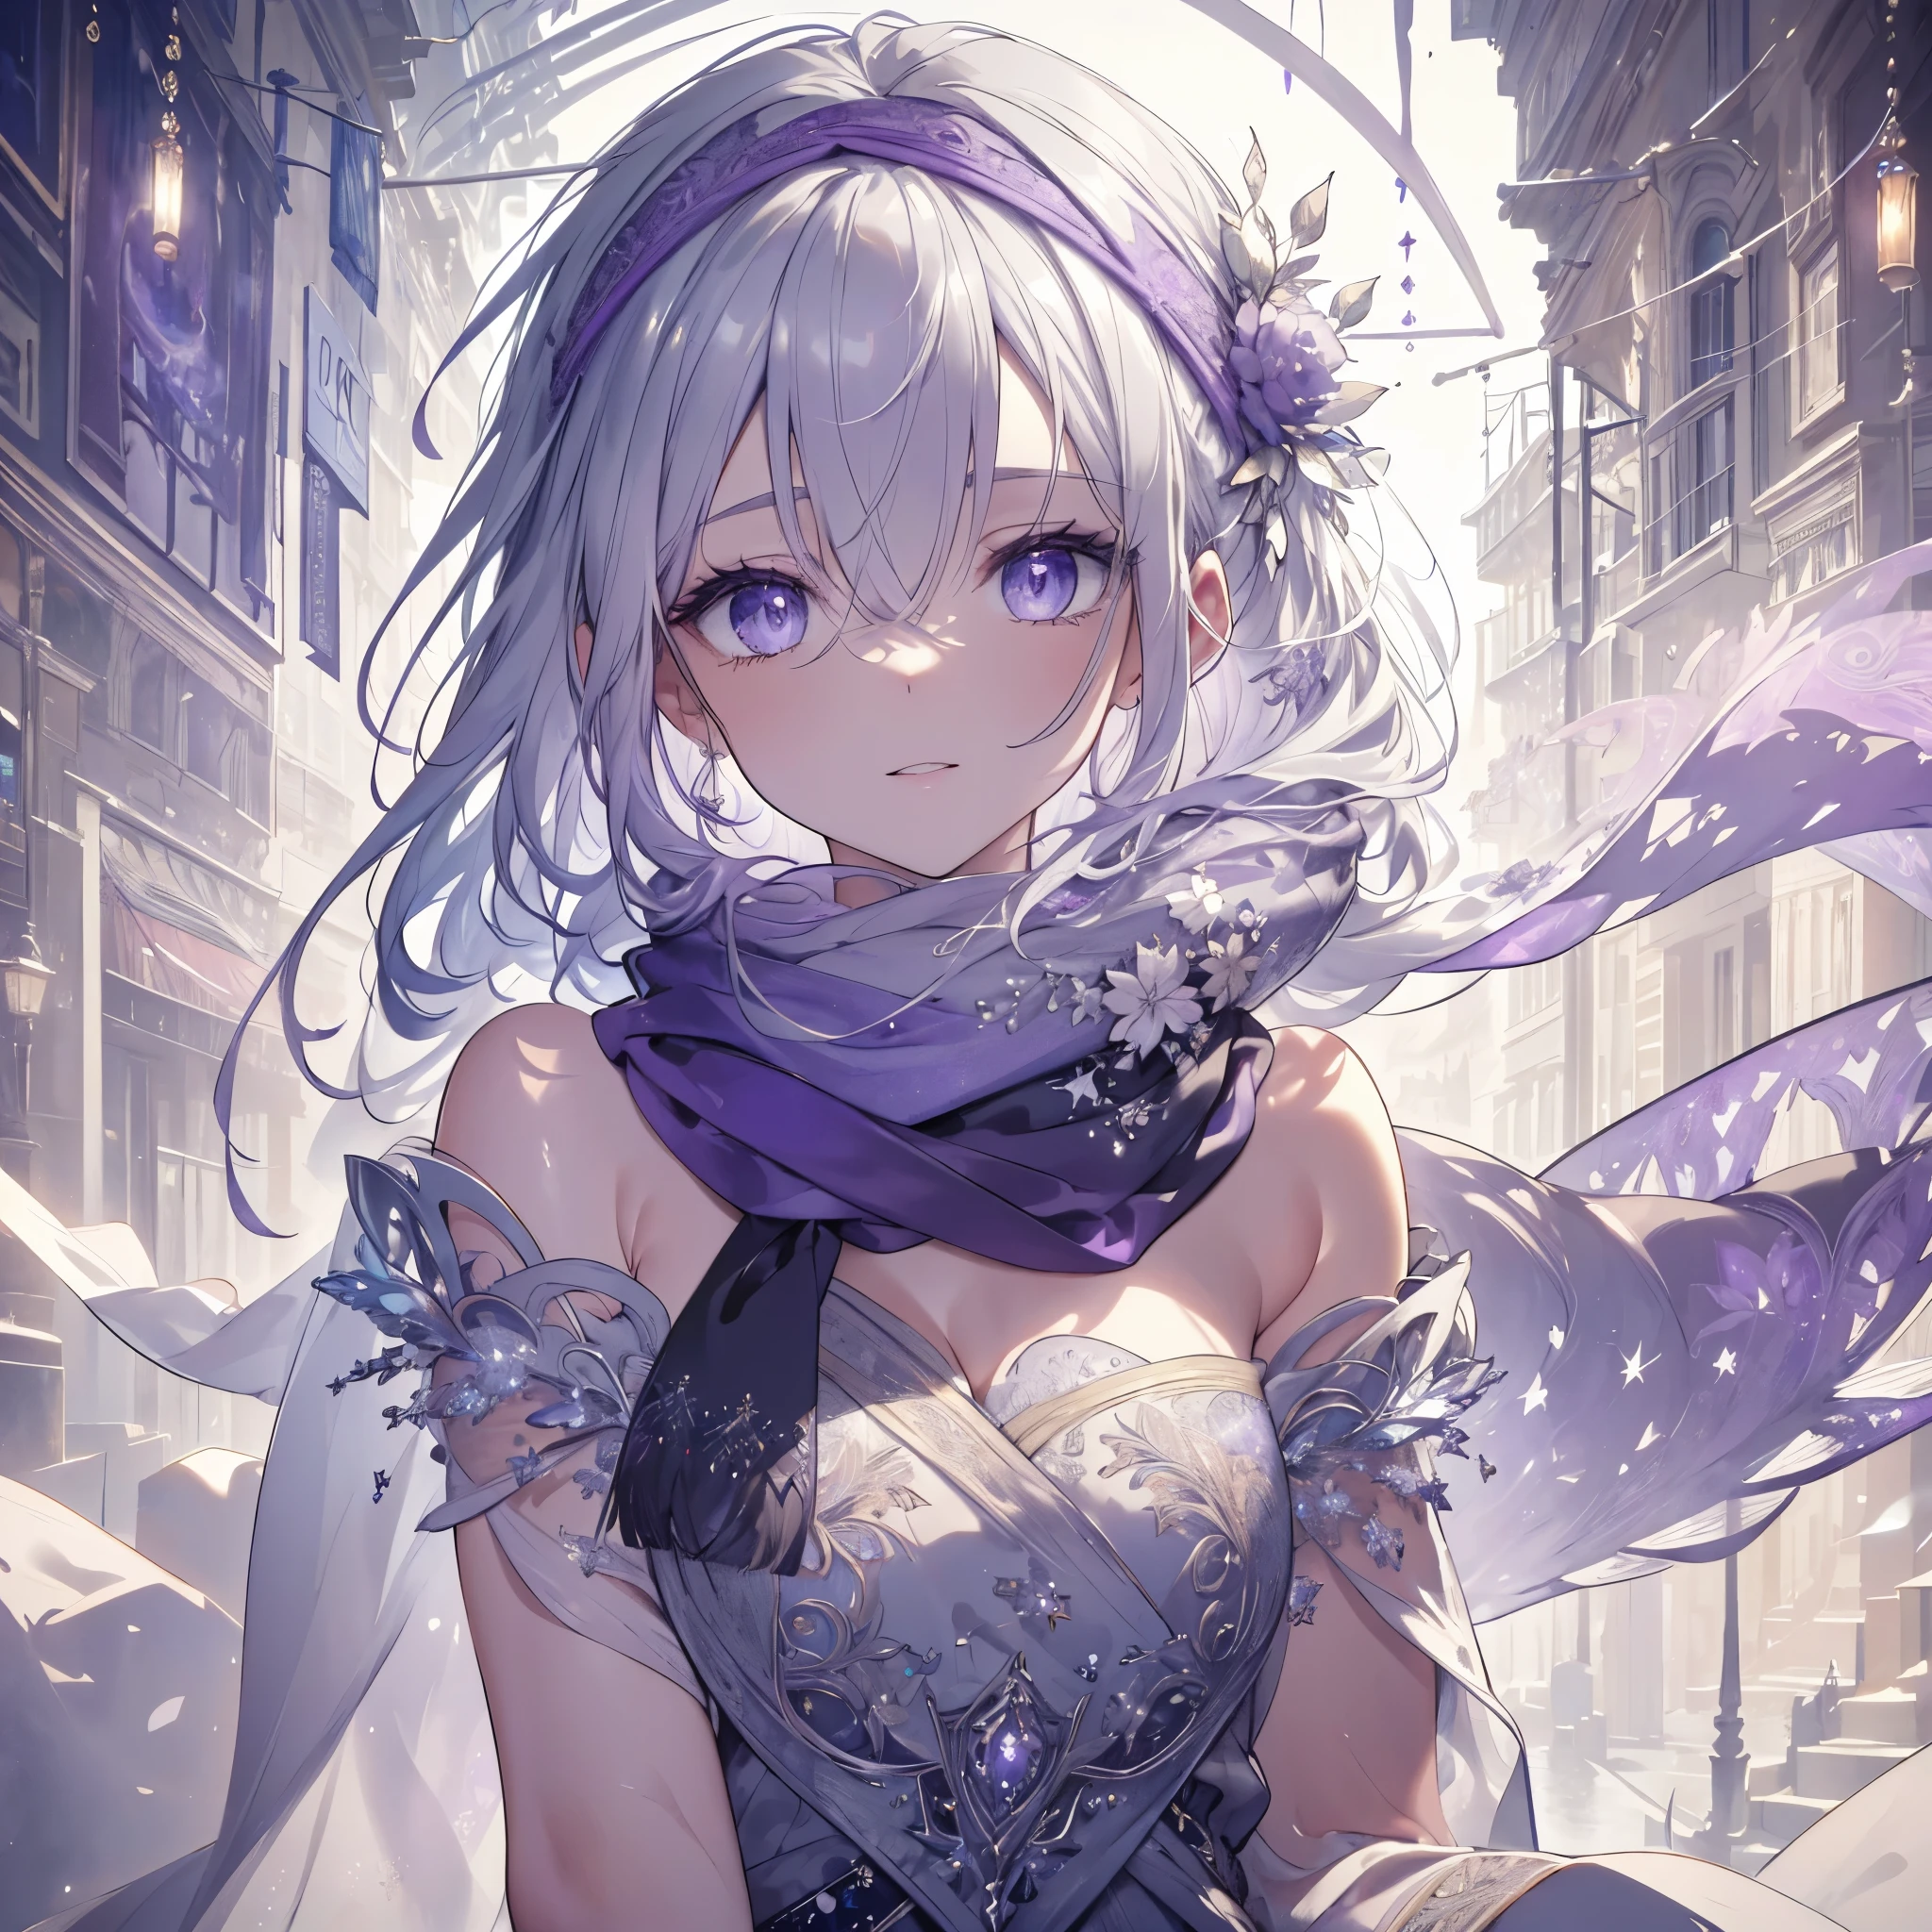 8k, wearing a scarf on the head, High definition RAW color art, Animation, Silver Marble Skin, (((Ultra detailed elegant))), Magical atmosphere, Detailed skin, Texture,(Intricately detailed, Fine detail, ultra-detail art), depth of fields, Bokeh, Silky Touch, Hyper Detail, (pastel purple), beautiful eyes, elegant face, neon downtown